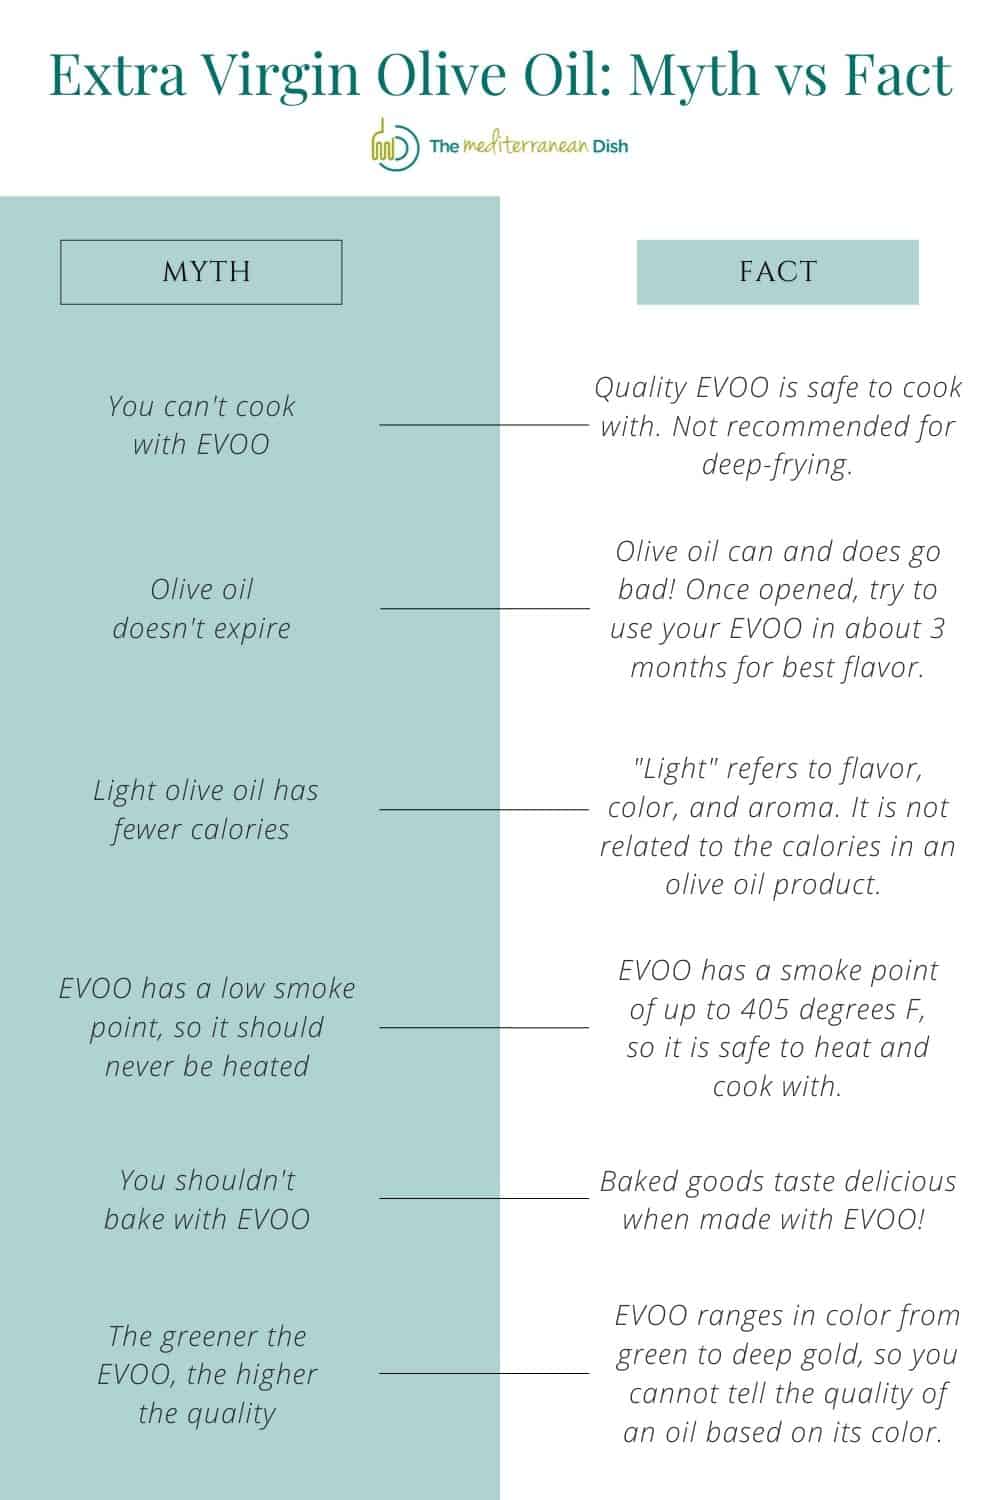 olive oil myths vs facts table